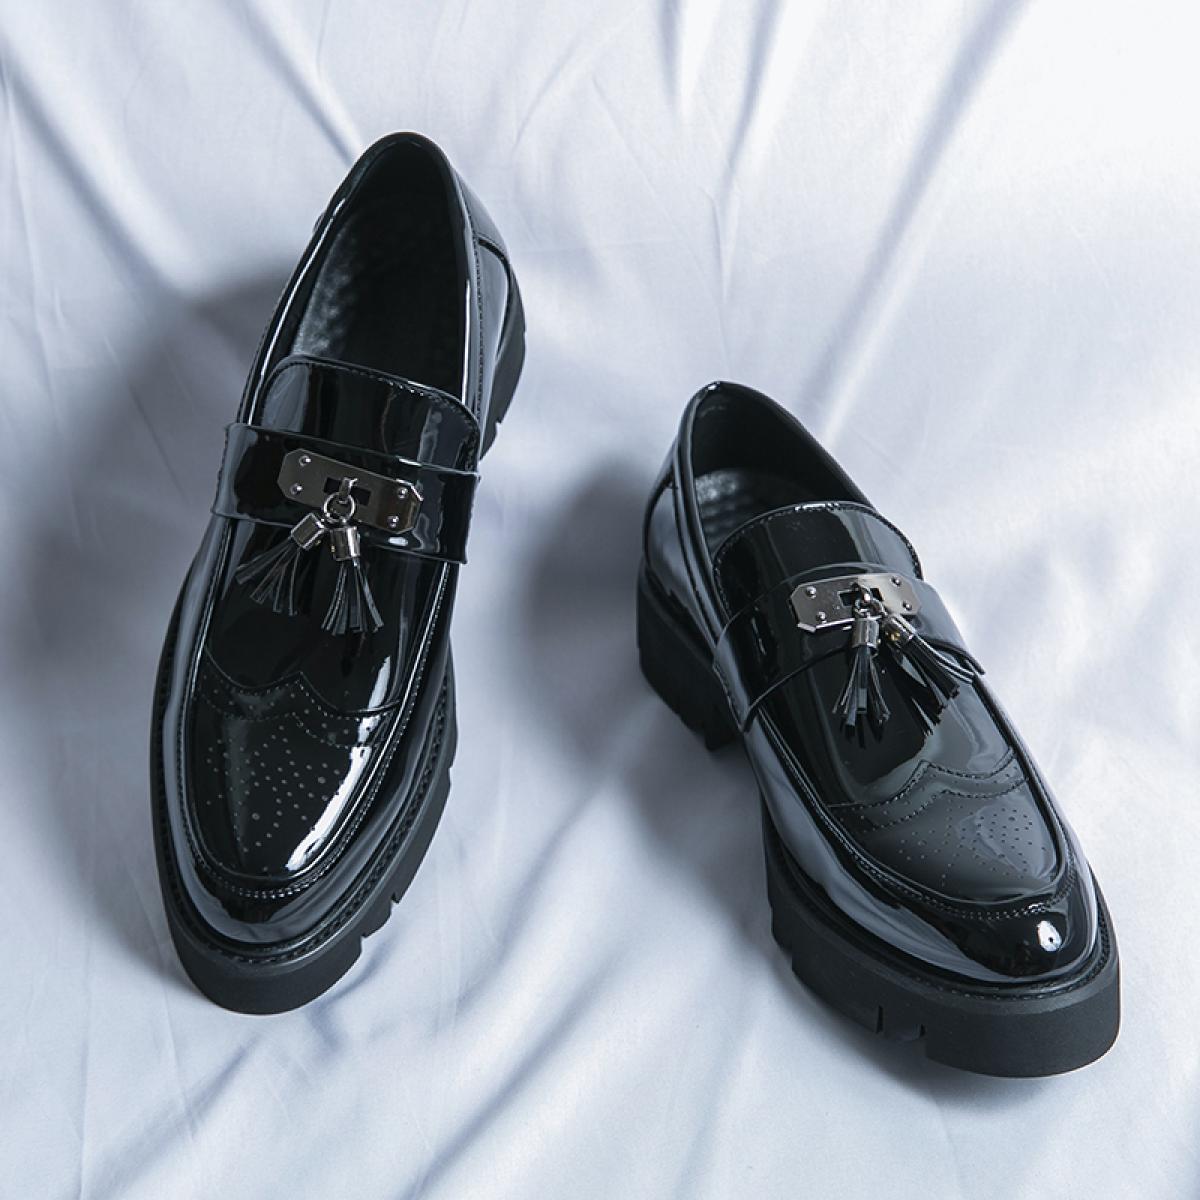 New Black Loafers Men Patent Leather Shoes Tassels Breathable Slip On Solid Casual Shoes Handmade Free Shipping Size 38 